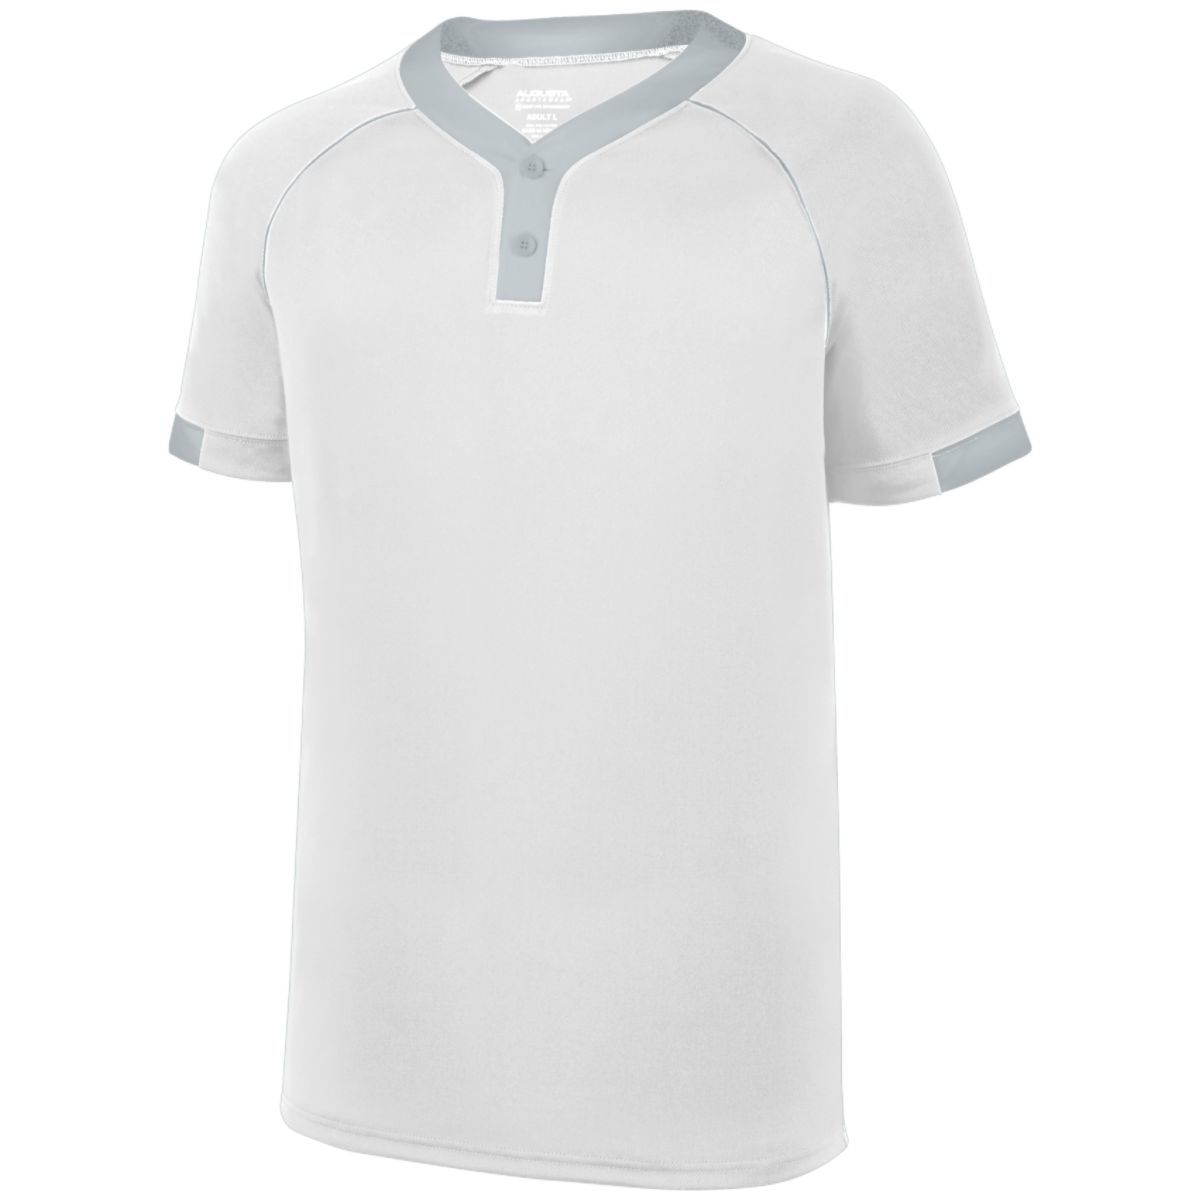 Augusta Sportswear Youth Stanza Jersey in White/Silver  -Part of the Youth, Youth-Jersey, Augusta-Products, Baseball, Shirts, All-Sports, All-Sports-1 product lines at KanaleyCreations.com